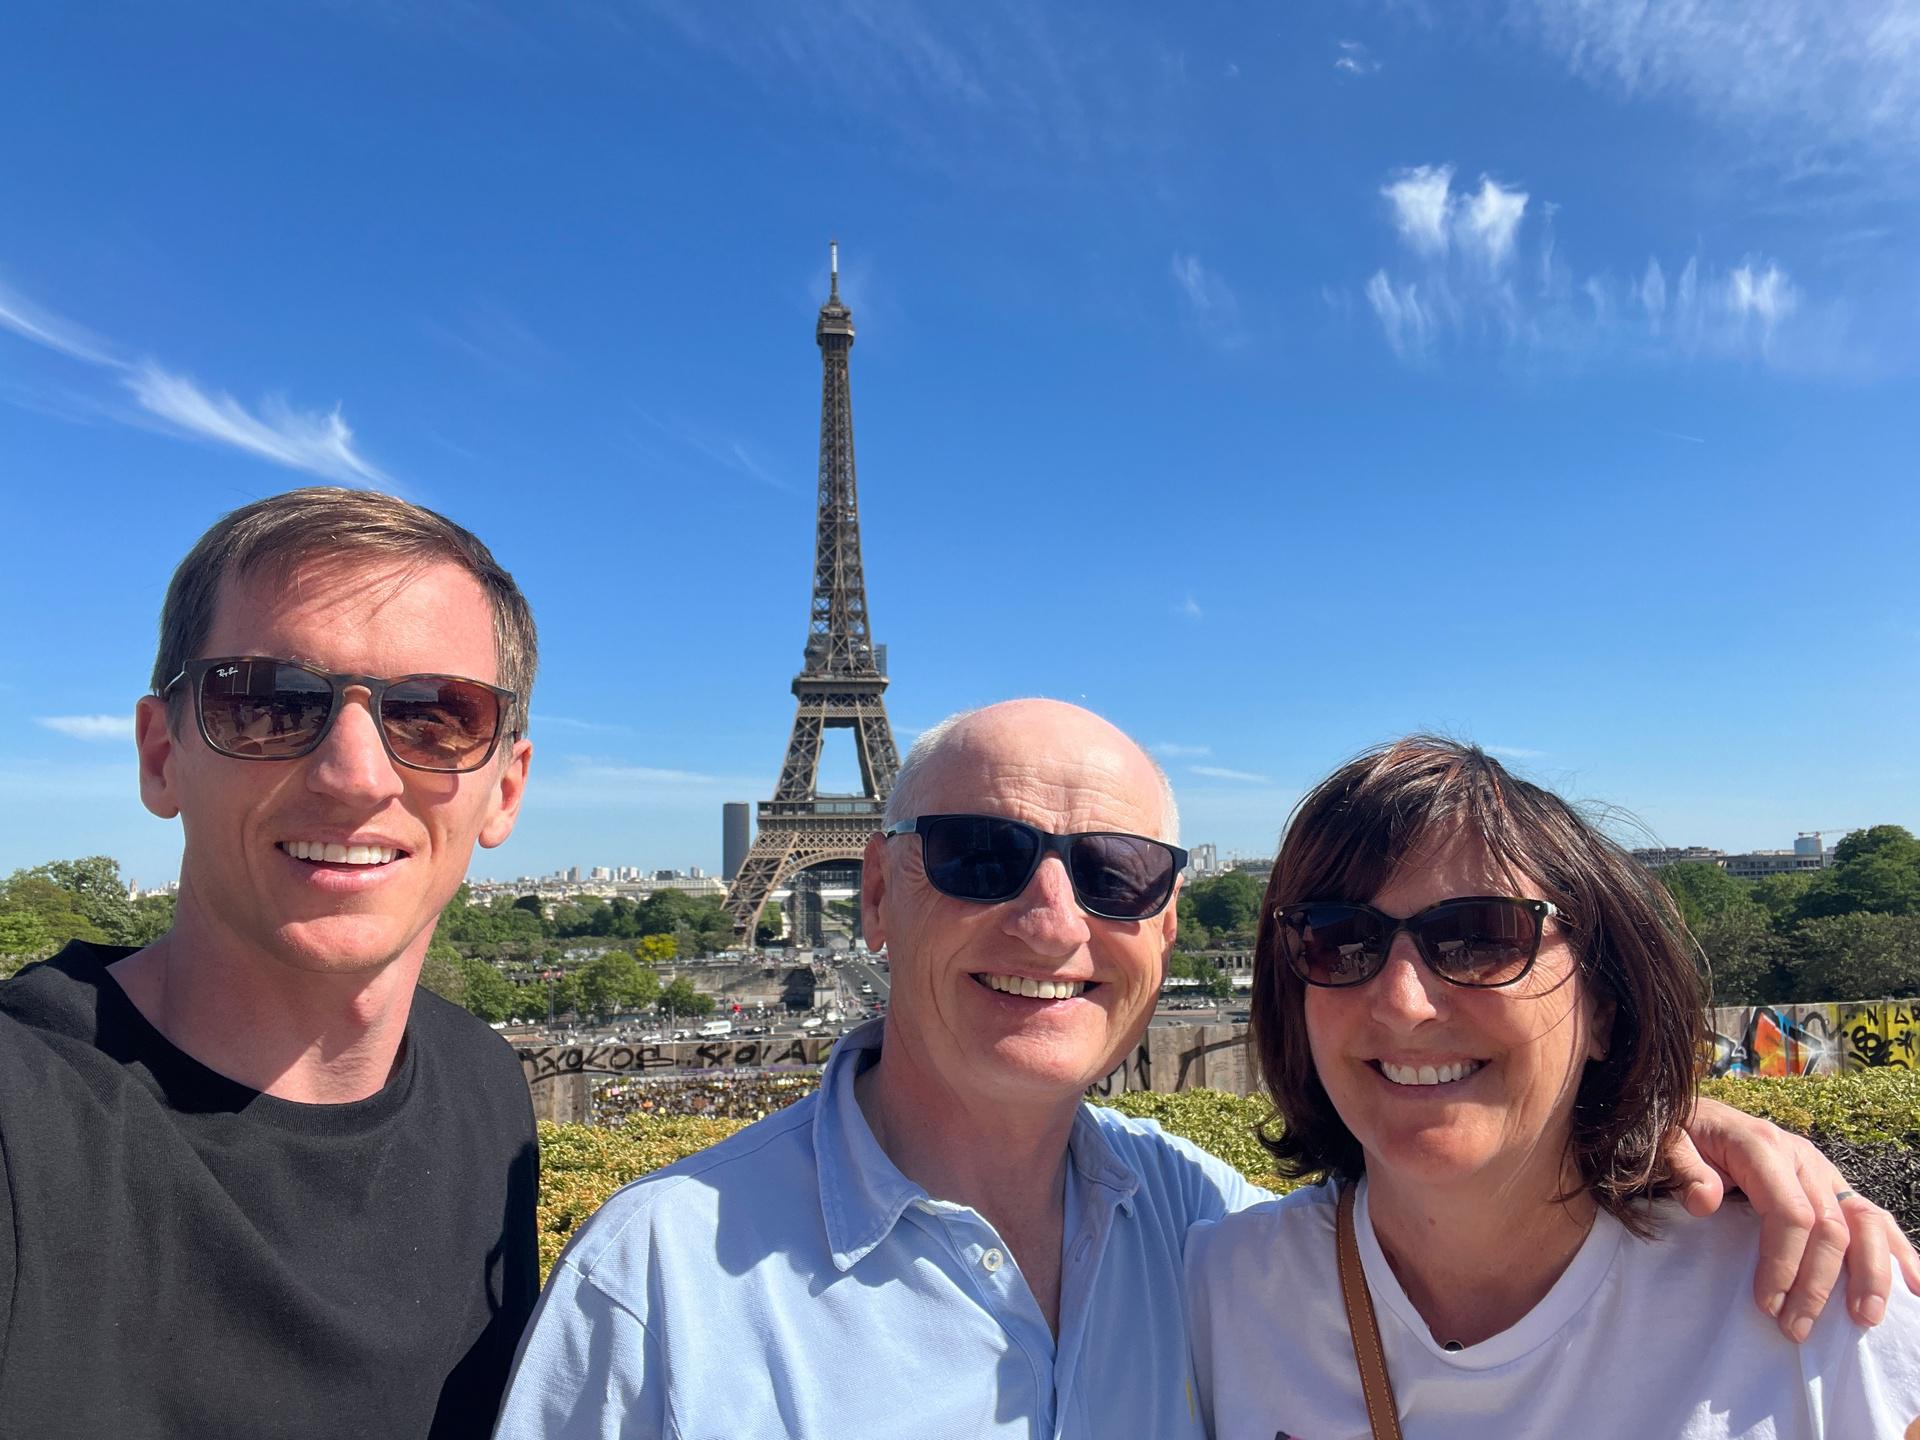 David Simpson with mom and dad and Eiffel Tower in Paris, France. Finishing up in Paris